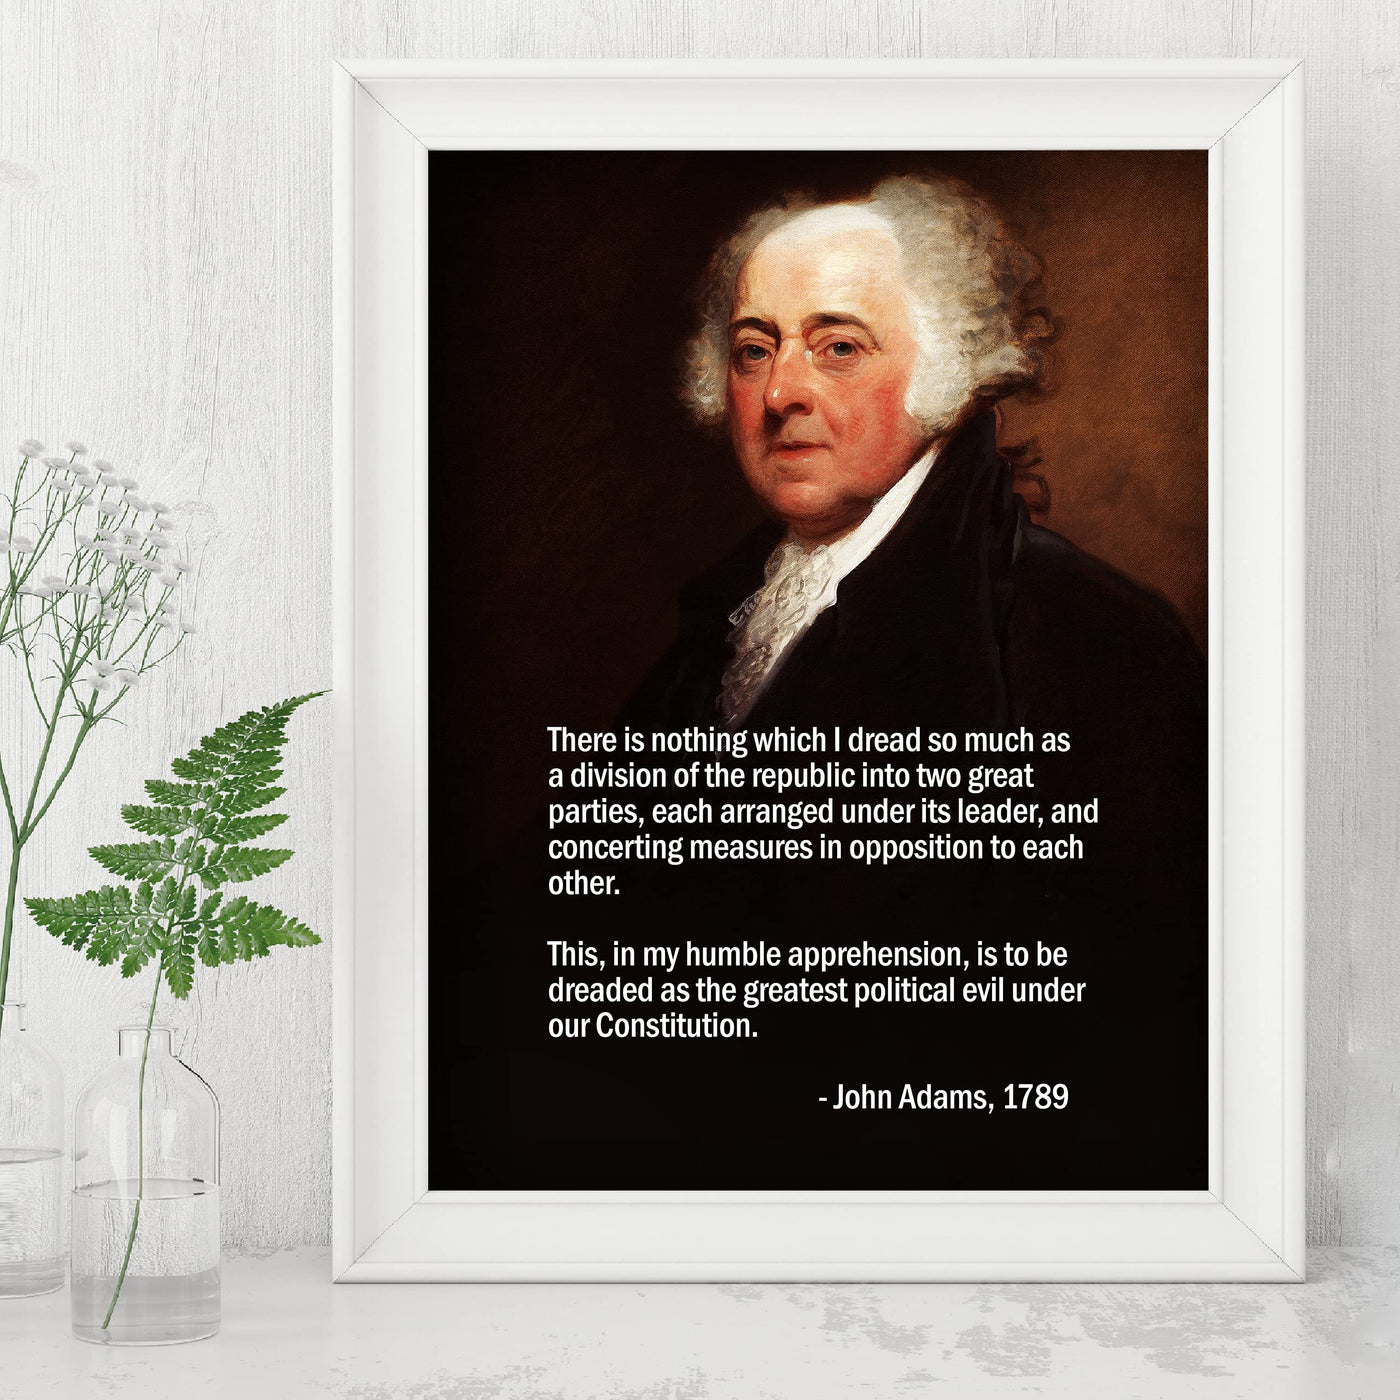 John Adams Quotes-"Nothing I Dread So Much as a Division of the Republic"-8x10" Patriotic American Wall Art Print w/Portrait Image-Ready to Frame. Political Decor for Home-Office-School-Library!